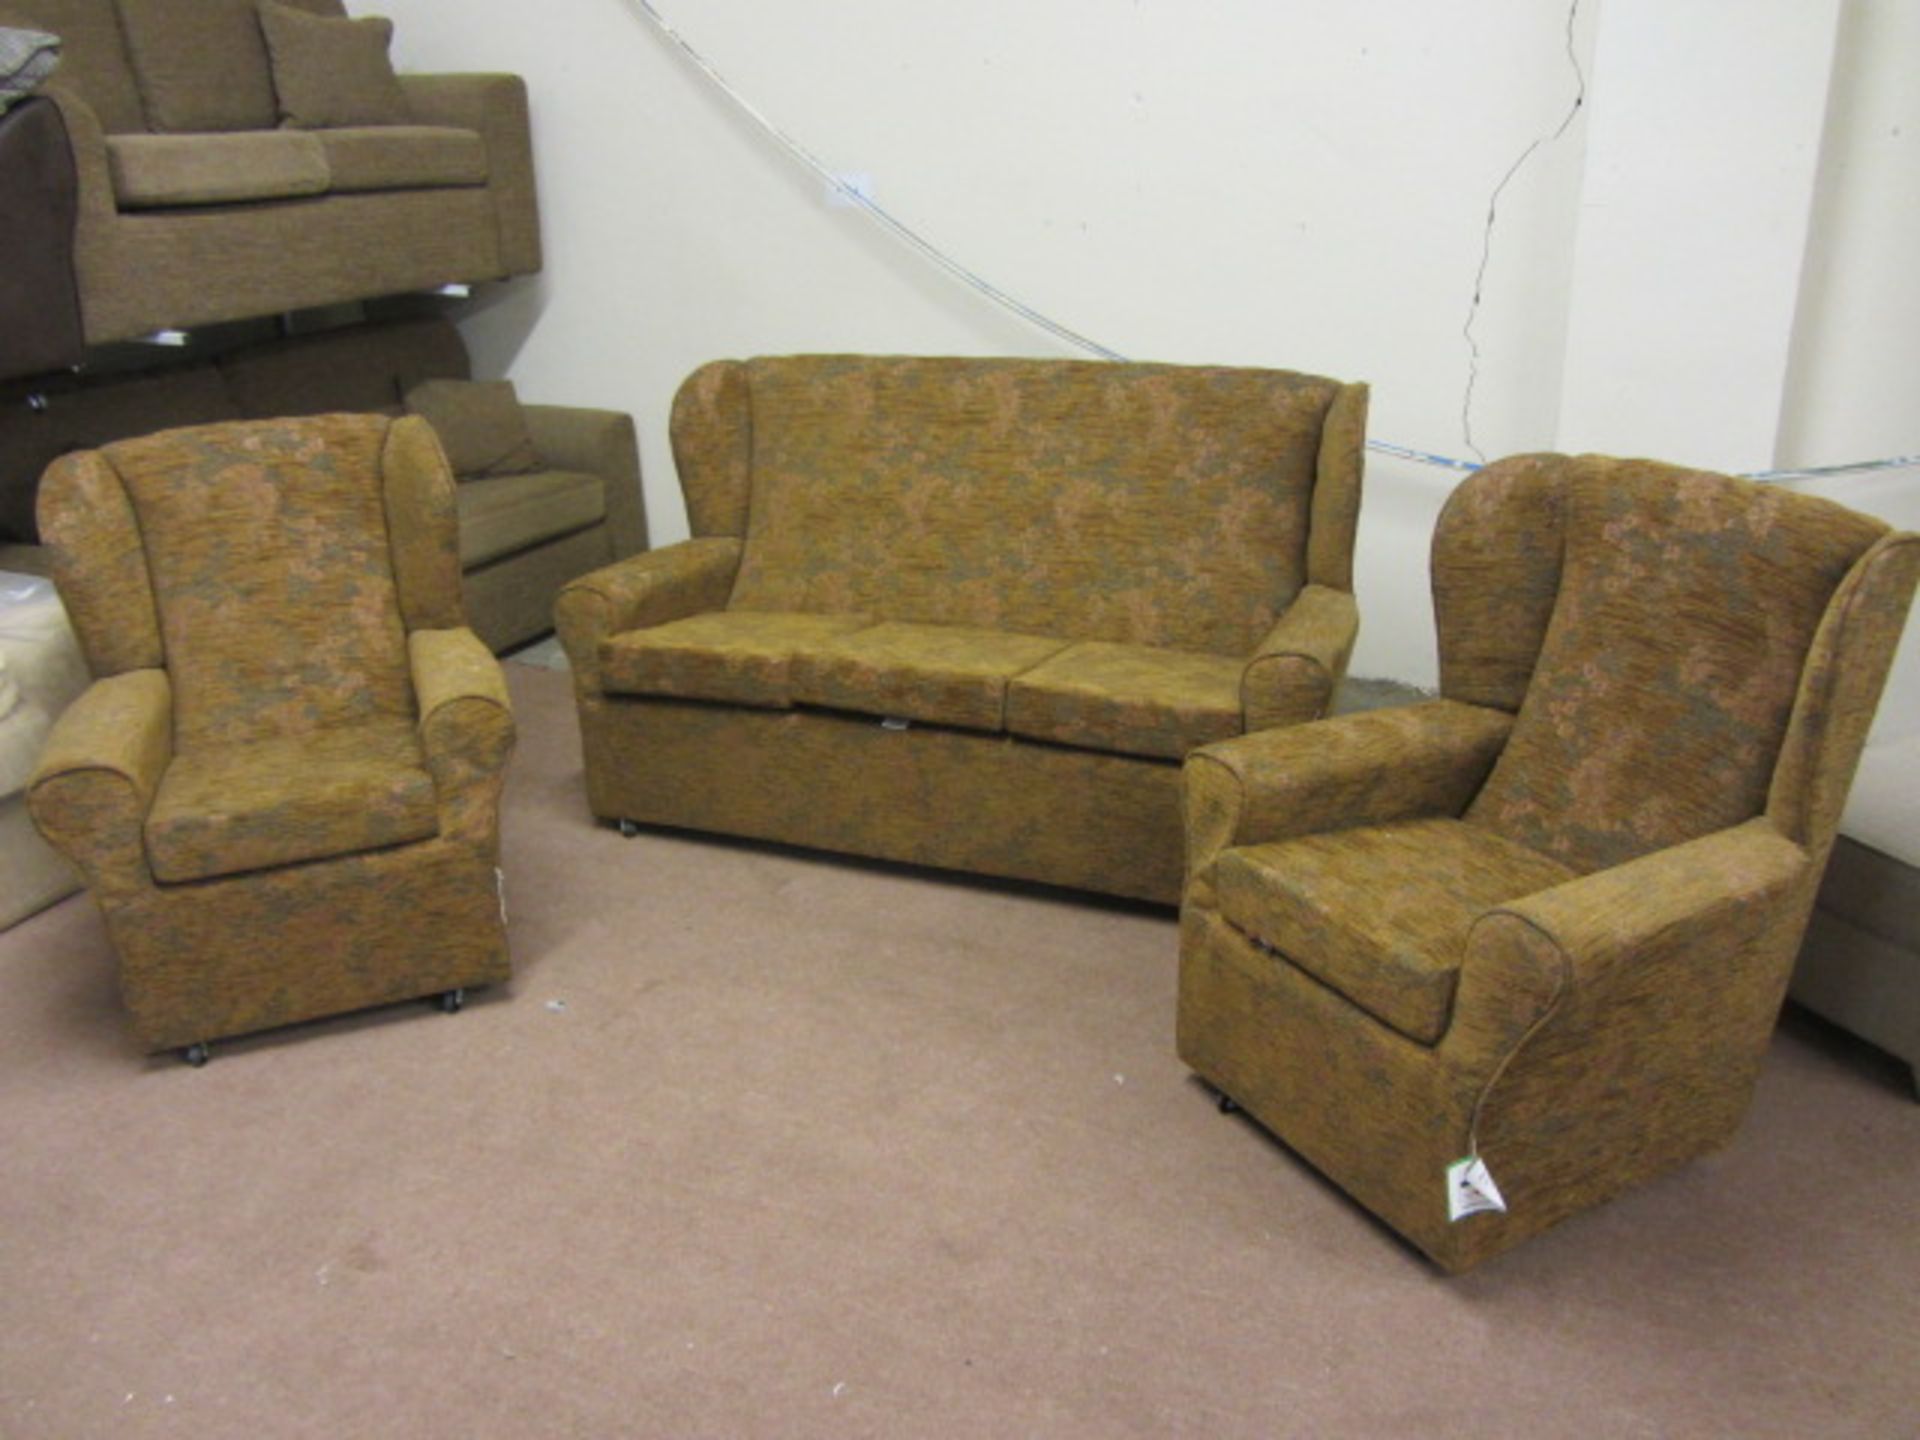 Cottage Style, 3 Seater & 2 Chairs, Brown/Gold Floral Tapestry type fabric, Reversible base cushions